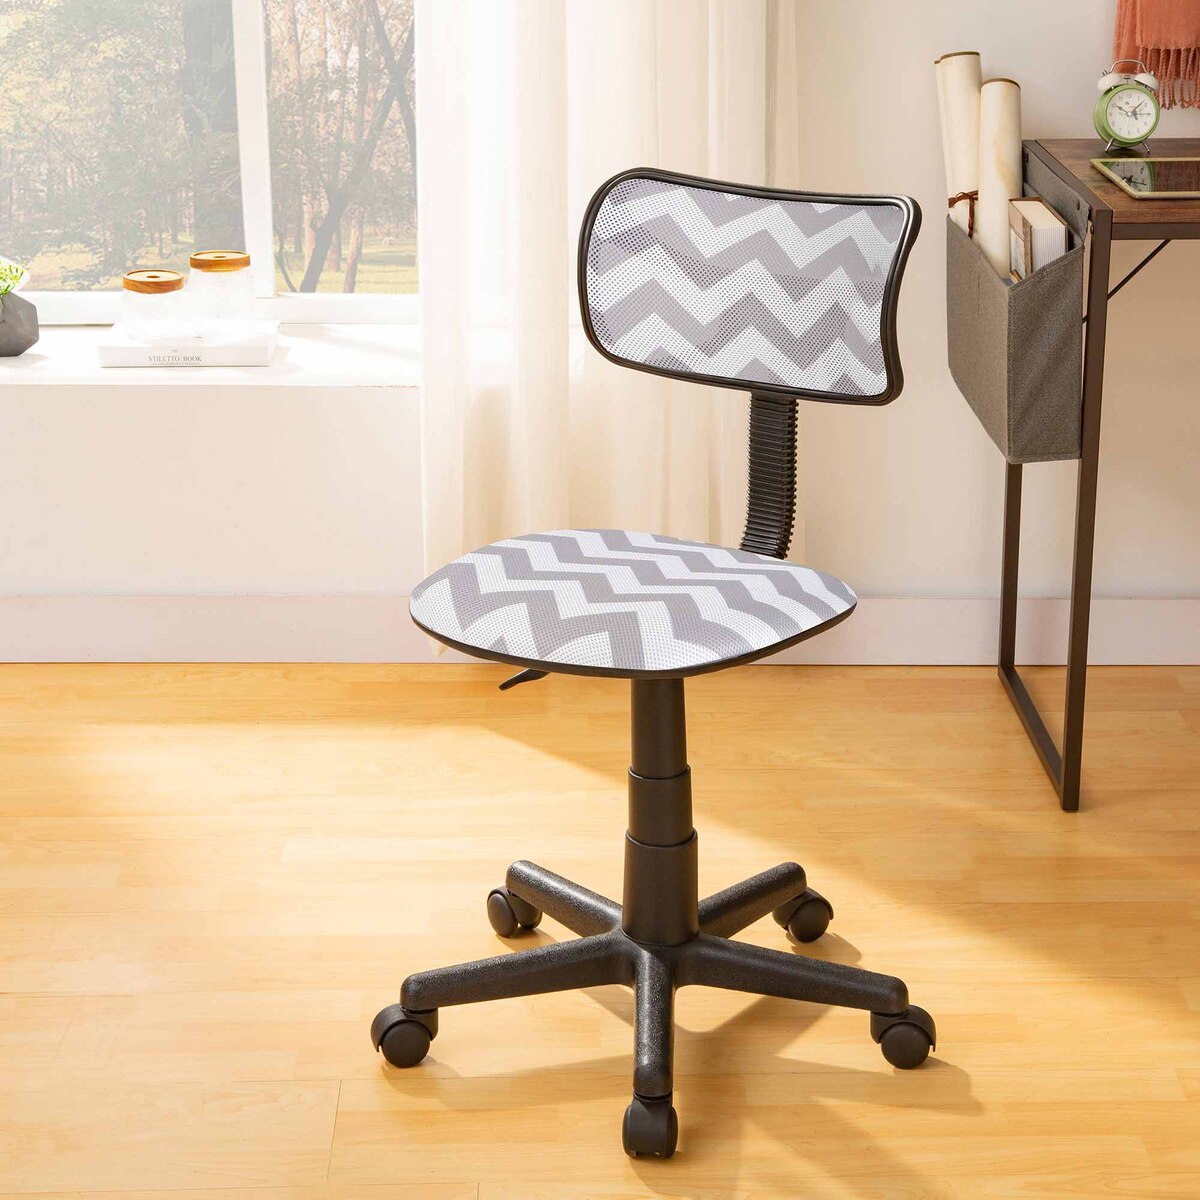 Maple Leaf Adjustable Kids Chair, Office, Computer Chair for Students With Swivel Wheels Grey chevron WK656376